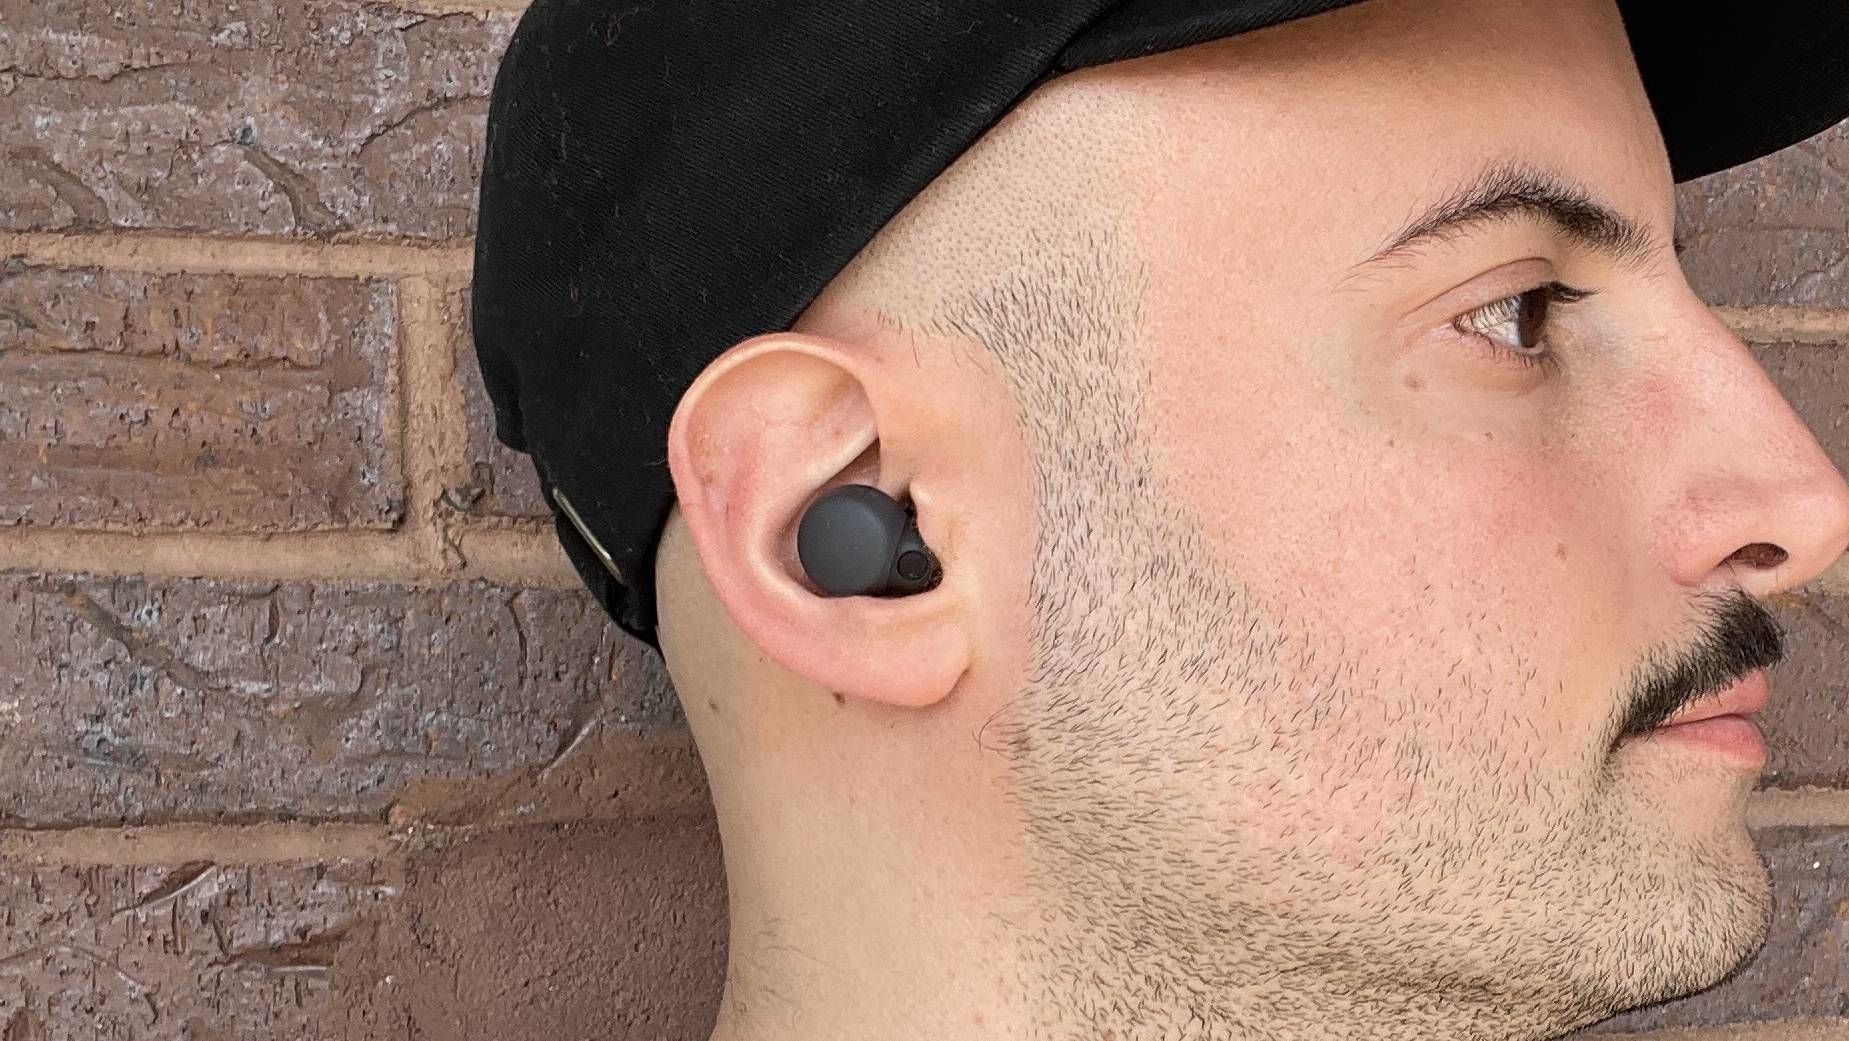 Sony wants you to wear its new LinkBuds S true wireless earbuds all day  every day